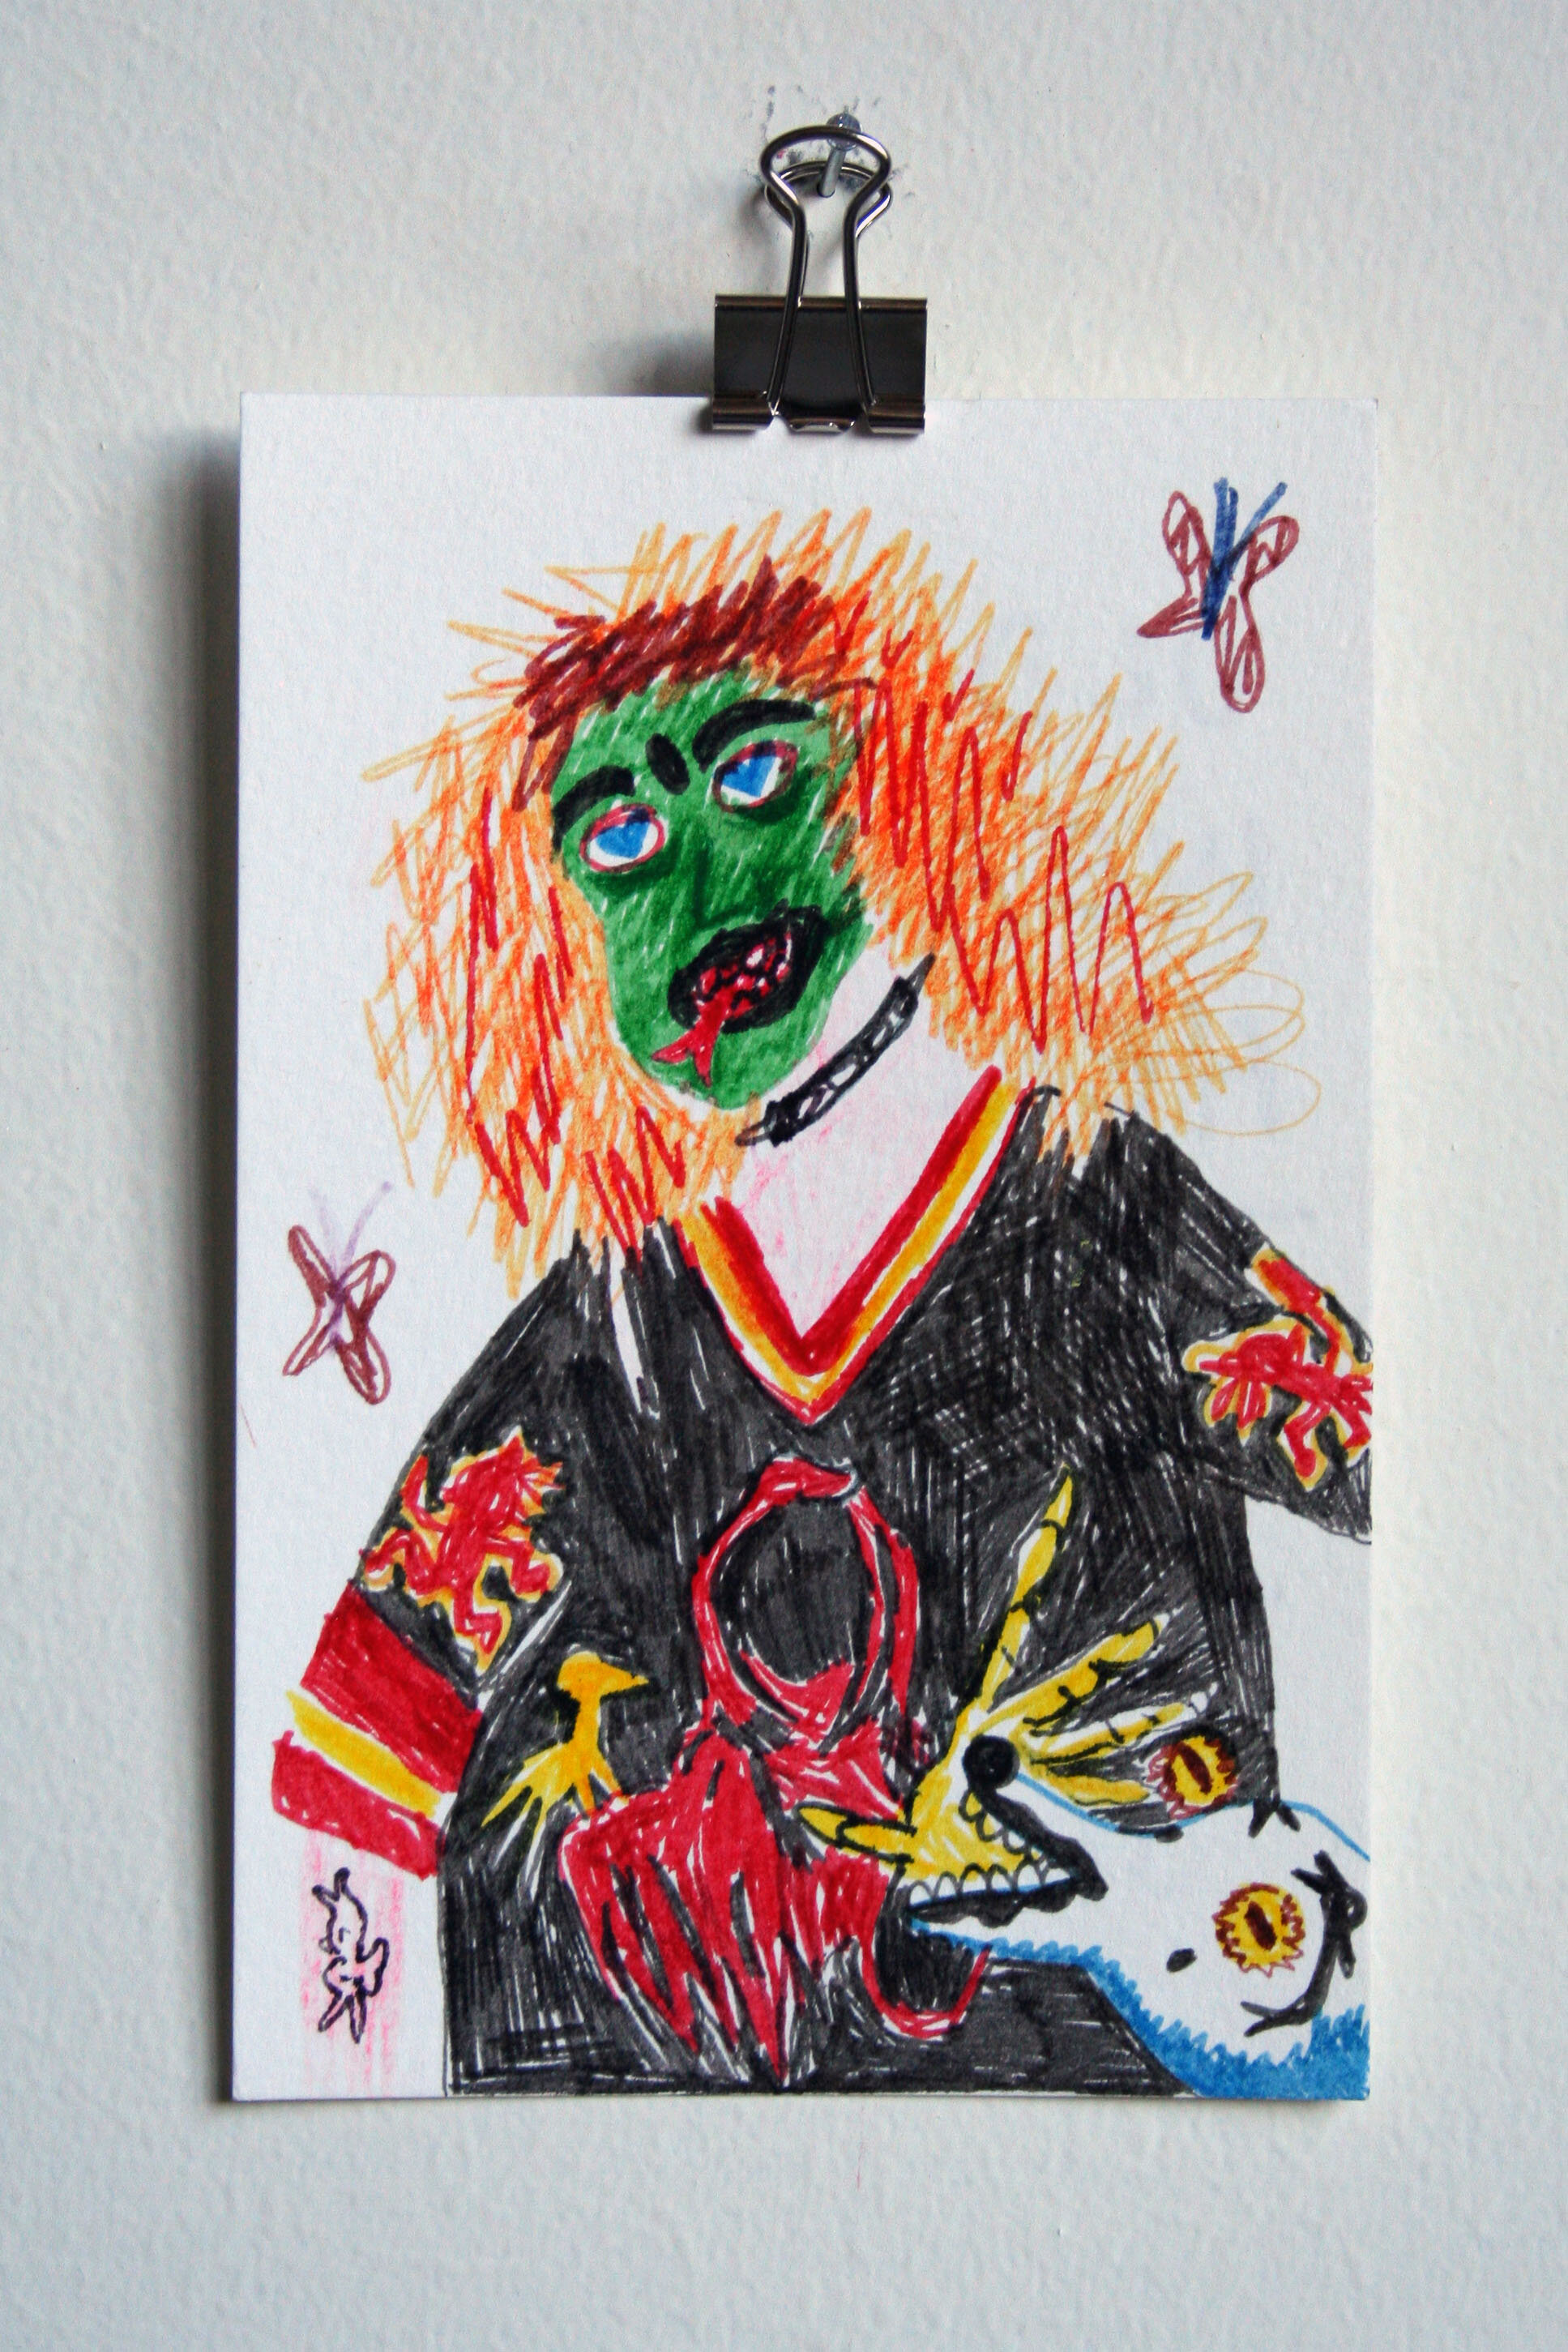   Old Put Wears Hell’s Pit Jersey,  2014  6 x 4 inches (15.24 x 10.16 cm.)  Marker on paper 